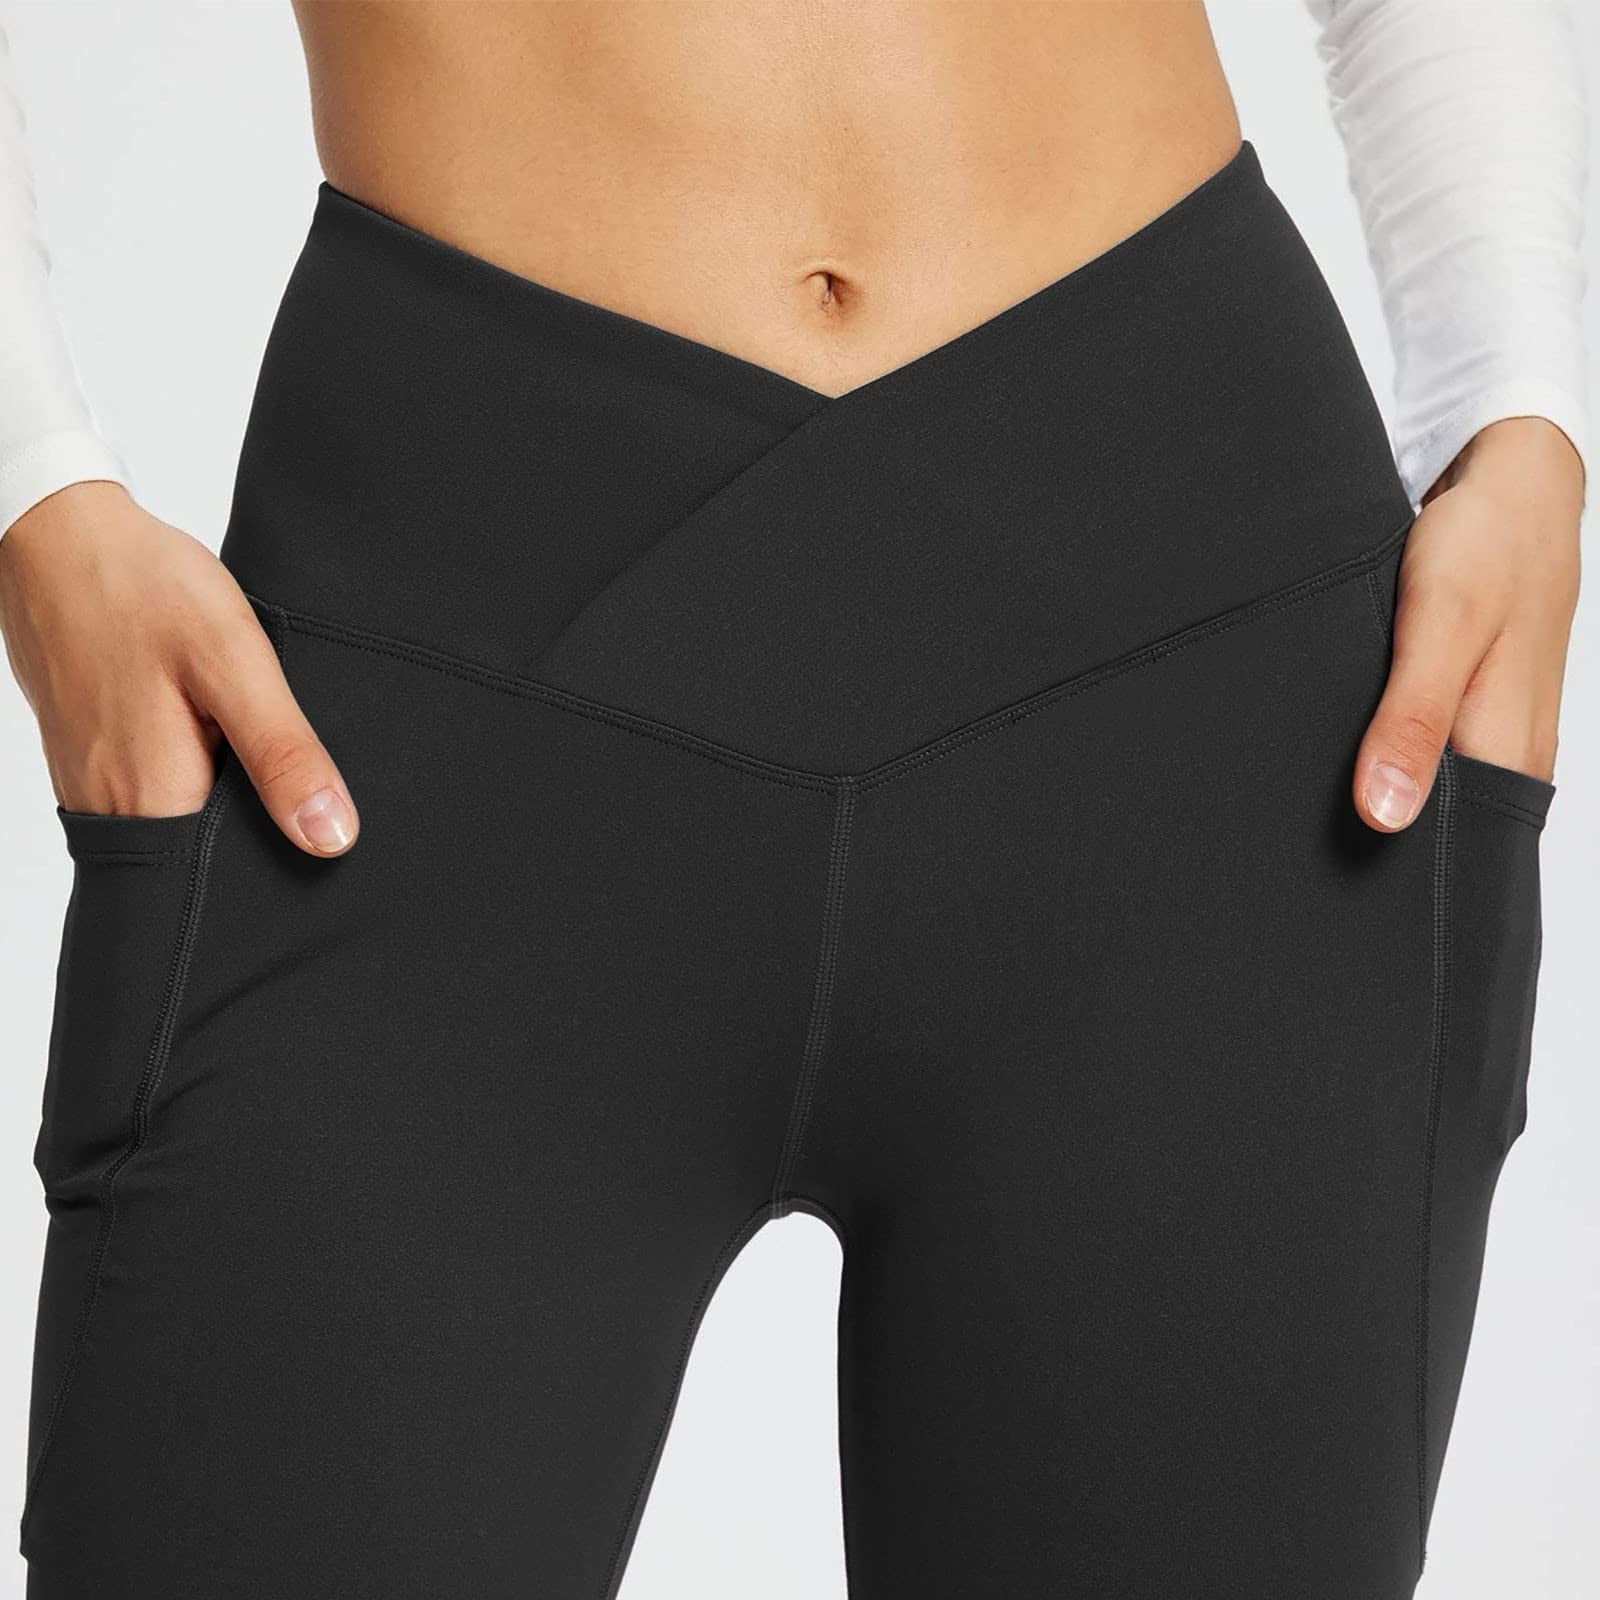 Up 50% off! Easter Gifts, Flare Leggings for Women, Crazy Yoga Leggings,  Womens Black Pants, Sparkly Pants for Women, Womens Athletic Pants,  Maternity